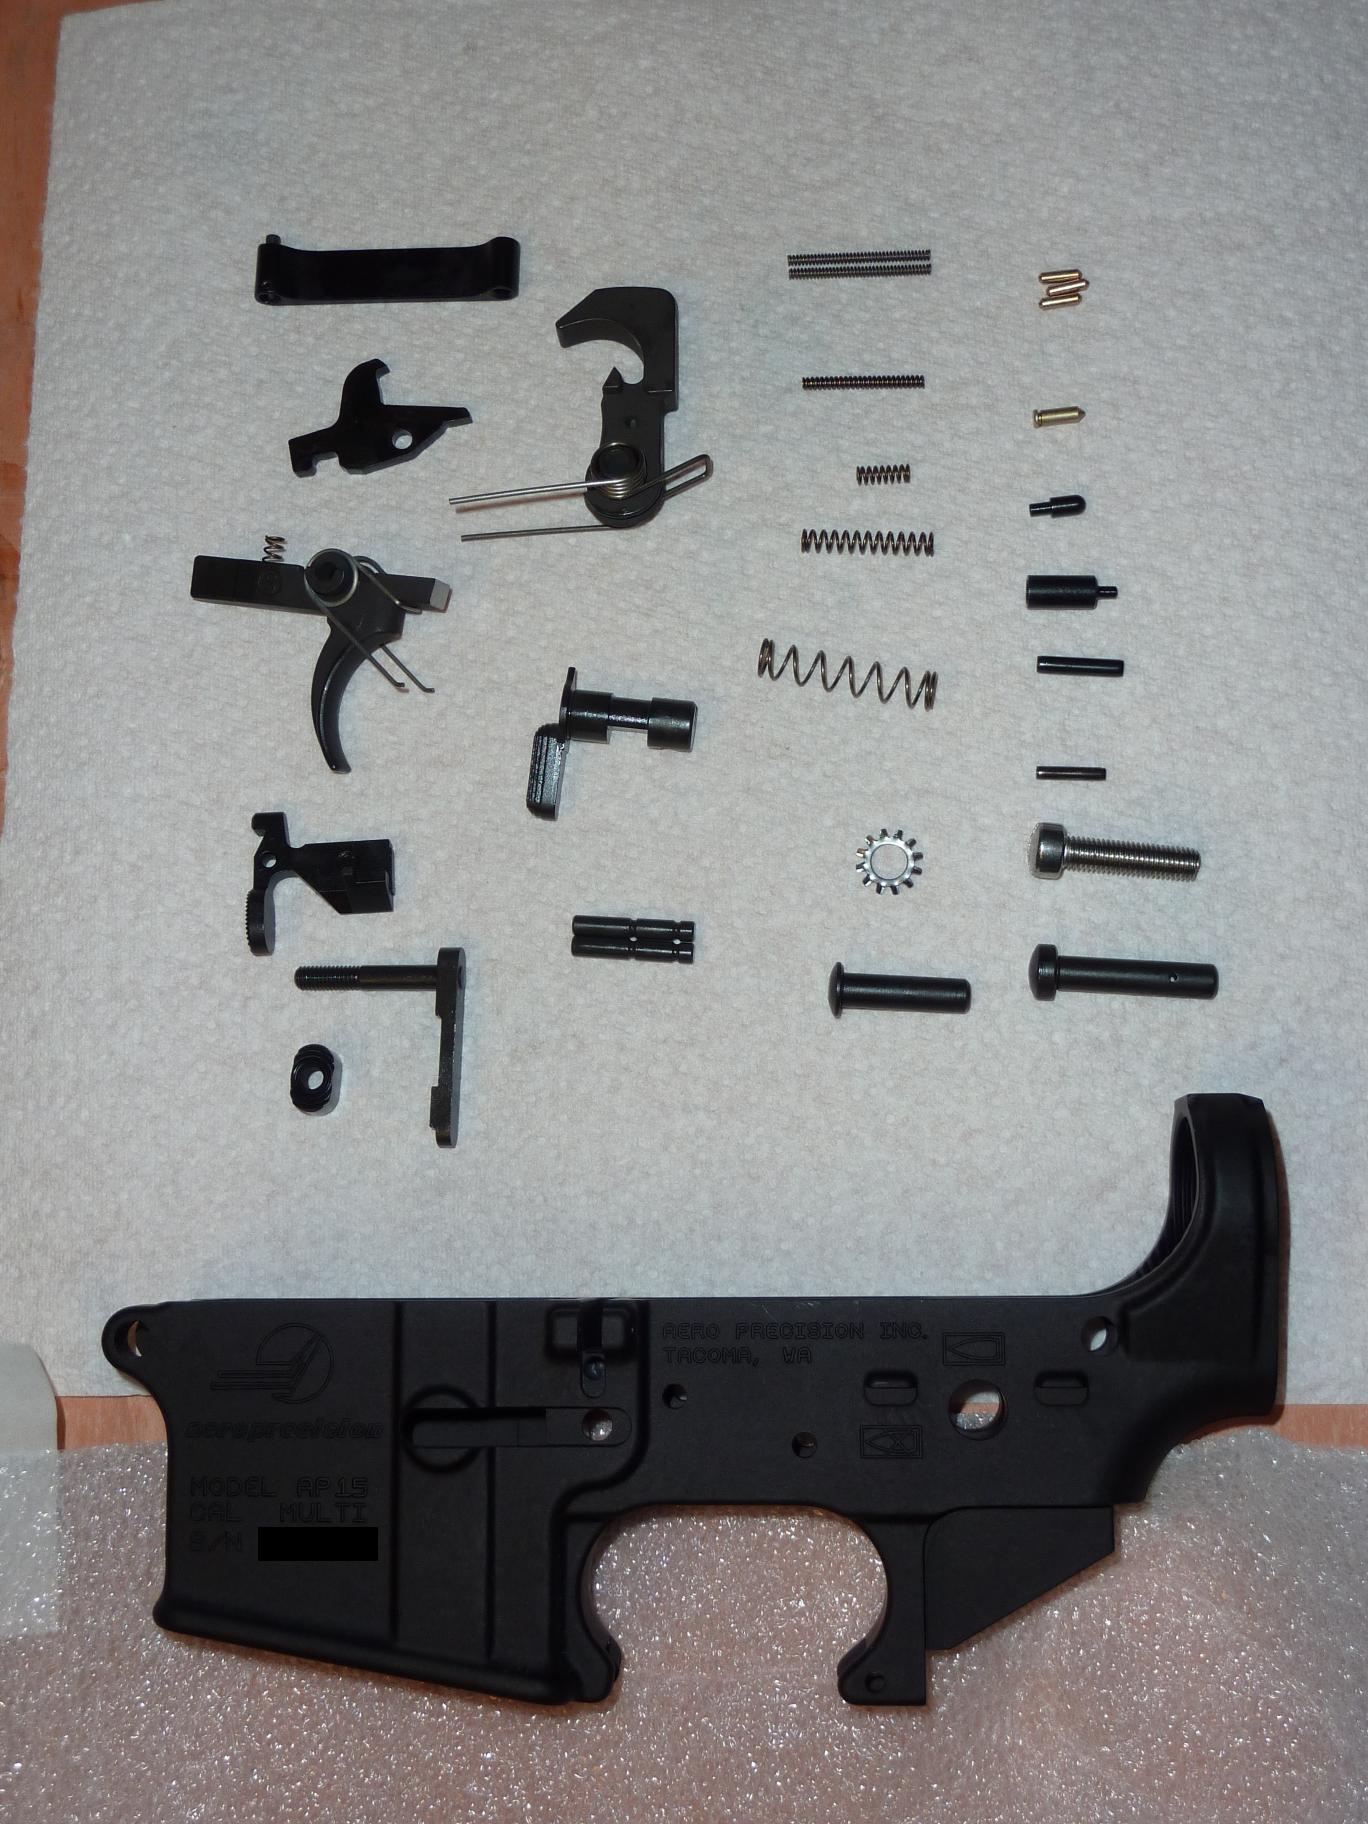 AR-15 lower receiver parts || DMC-ZS3@6.5 | 1/30s | f3.6 | ISO100 || 2010-03-20 23:04:01